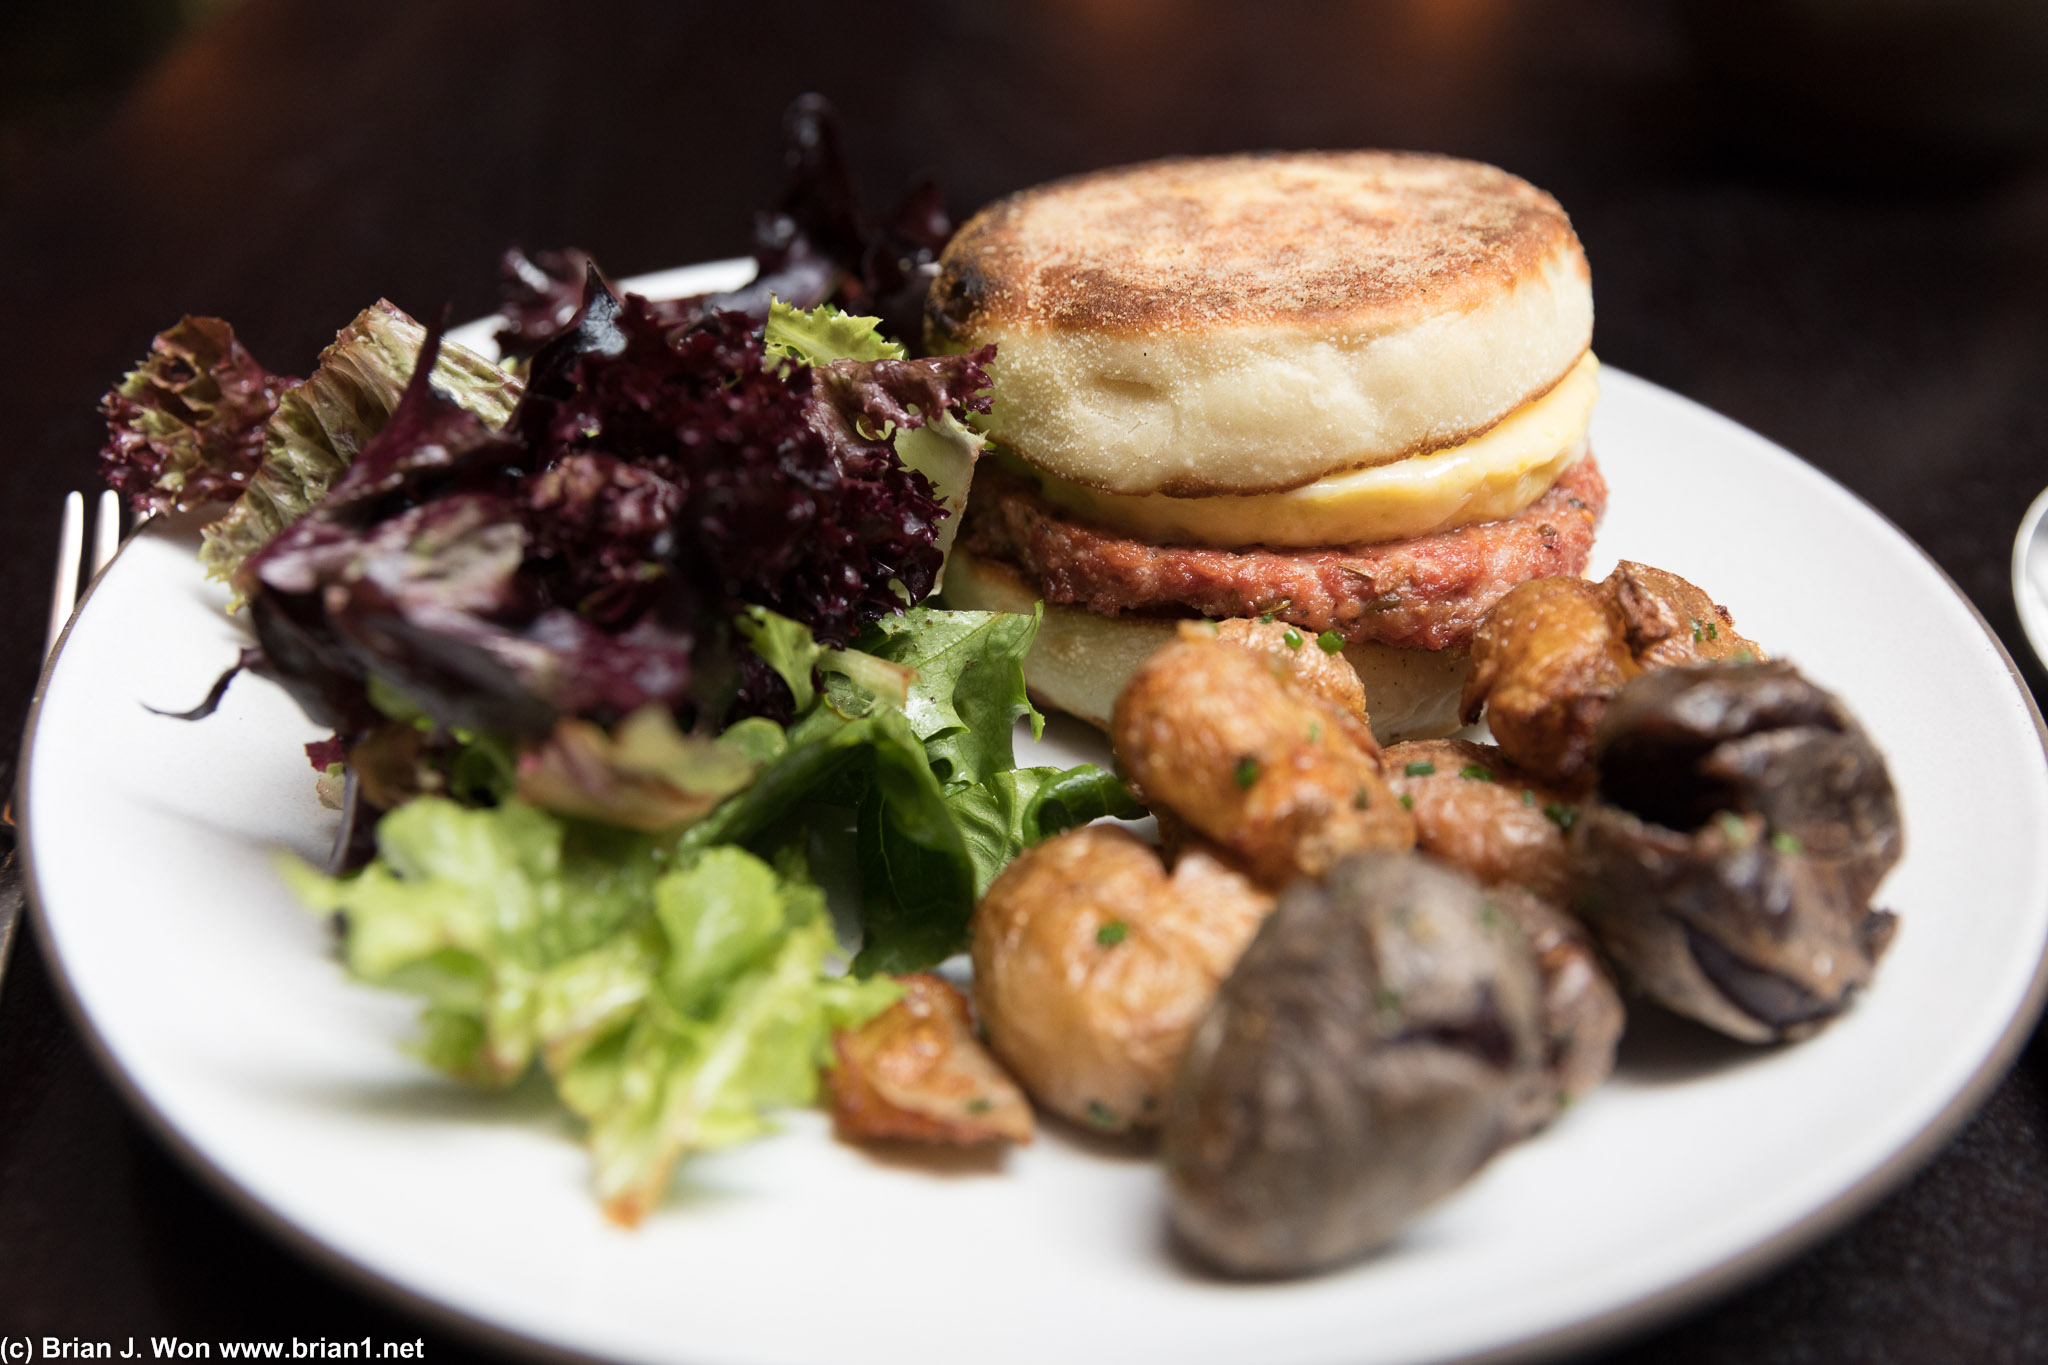 Home made english muffin stole the show-- waaaay more memorable than the duck sausage.